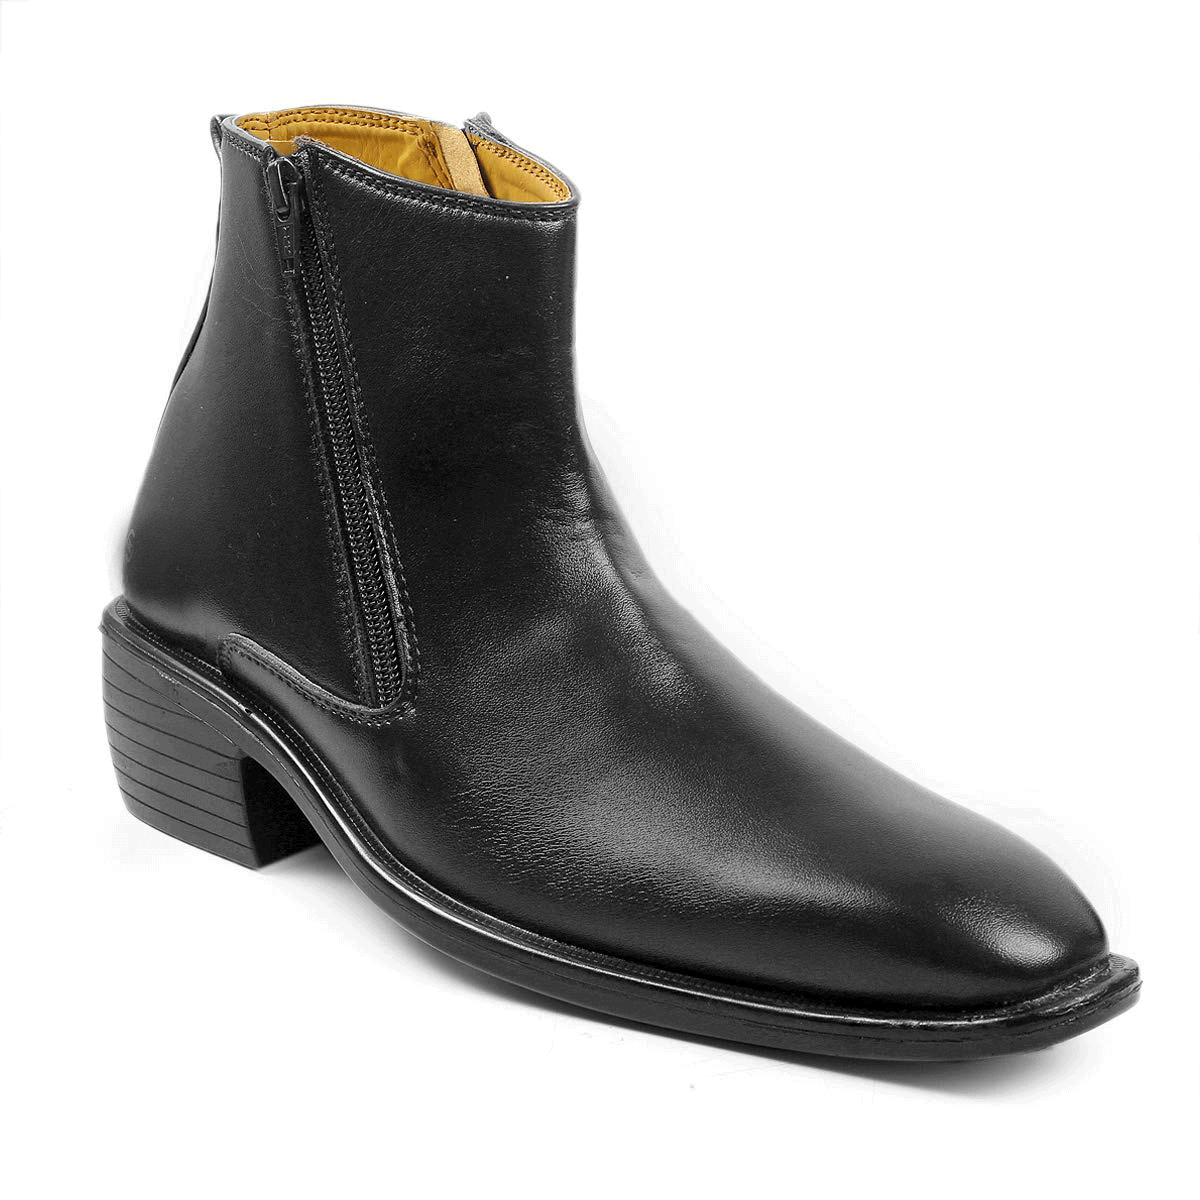 New Arrival Black Casual Formal Zipper Ankle Boots For Men-JonasParamount